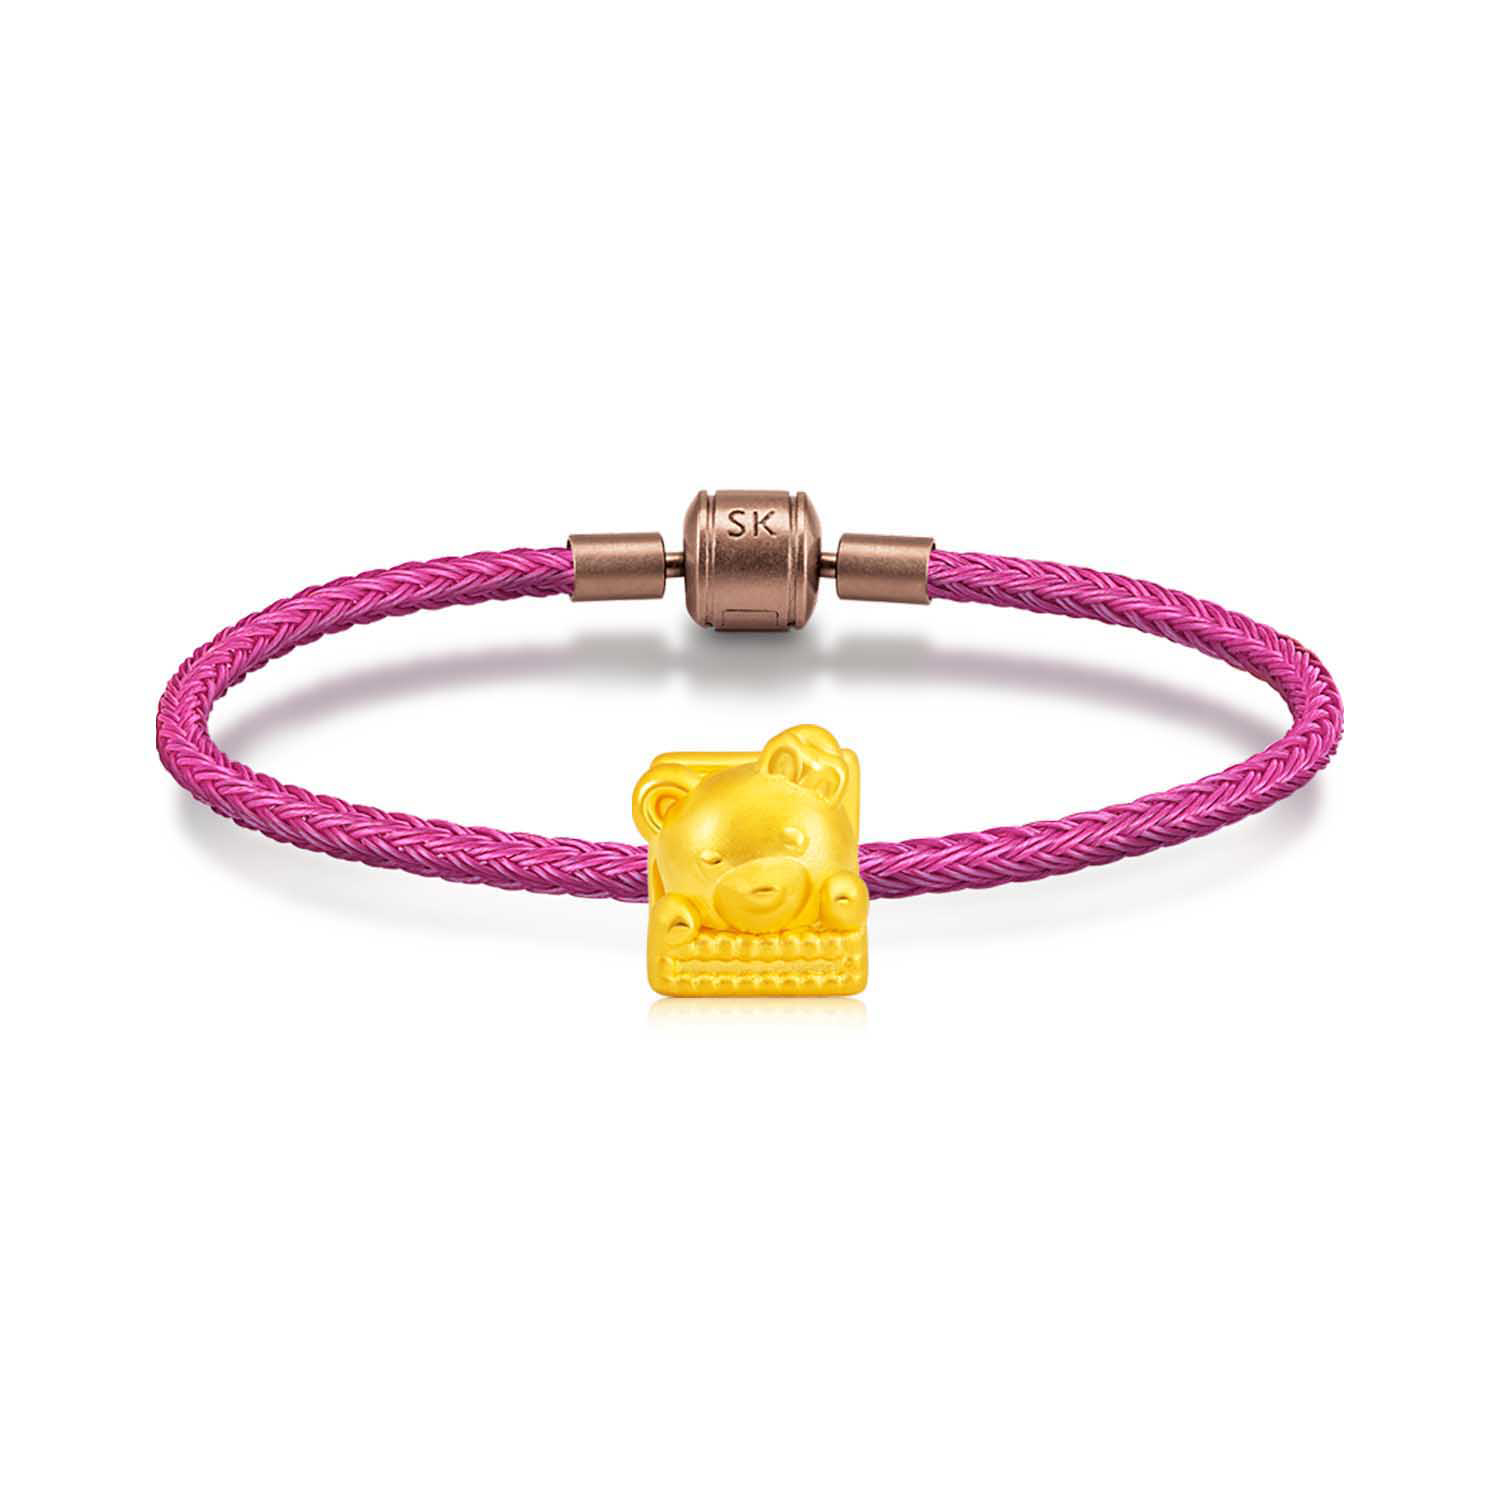 SK Jewellery 999 Pure Gold Enchanting Teddy Charms Bracelet